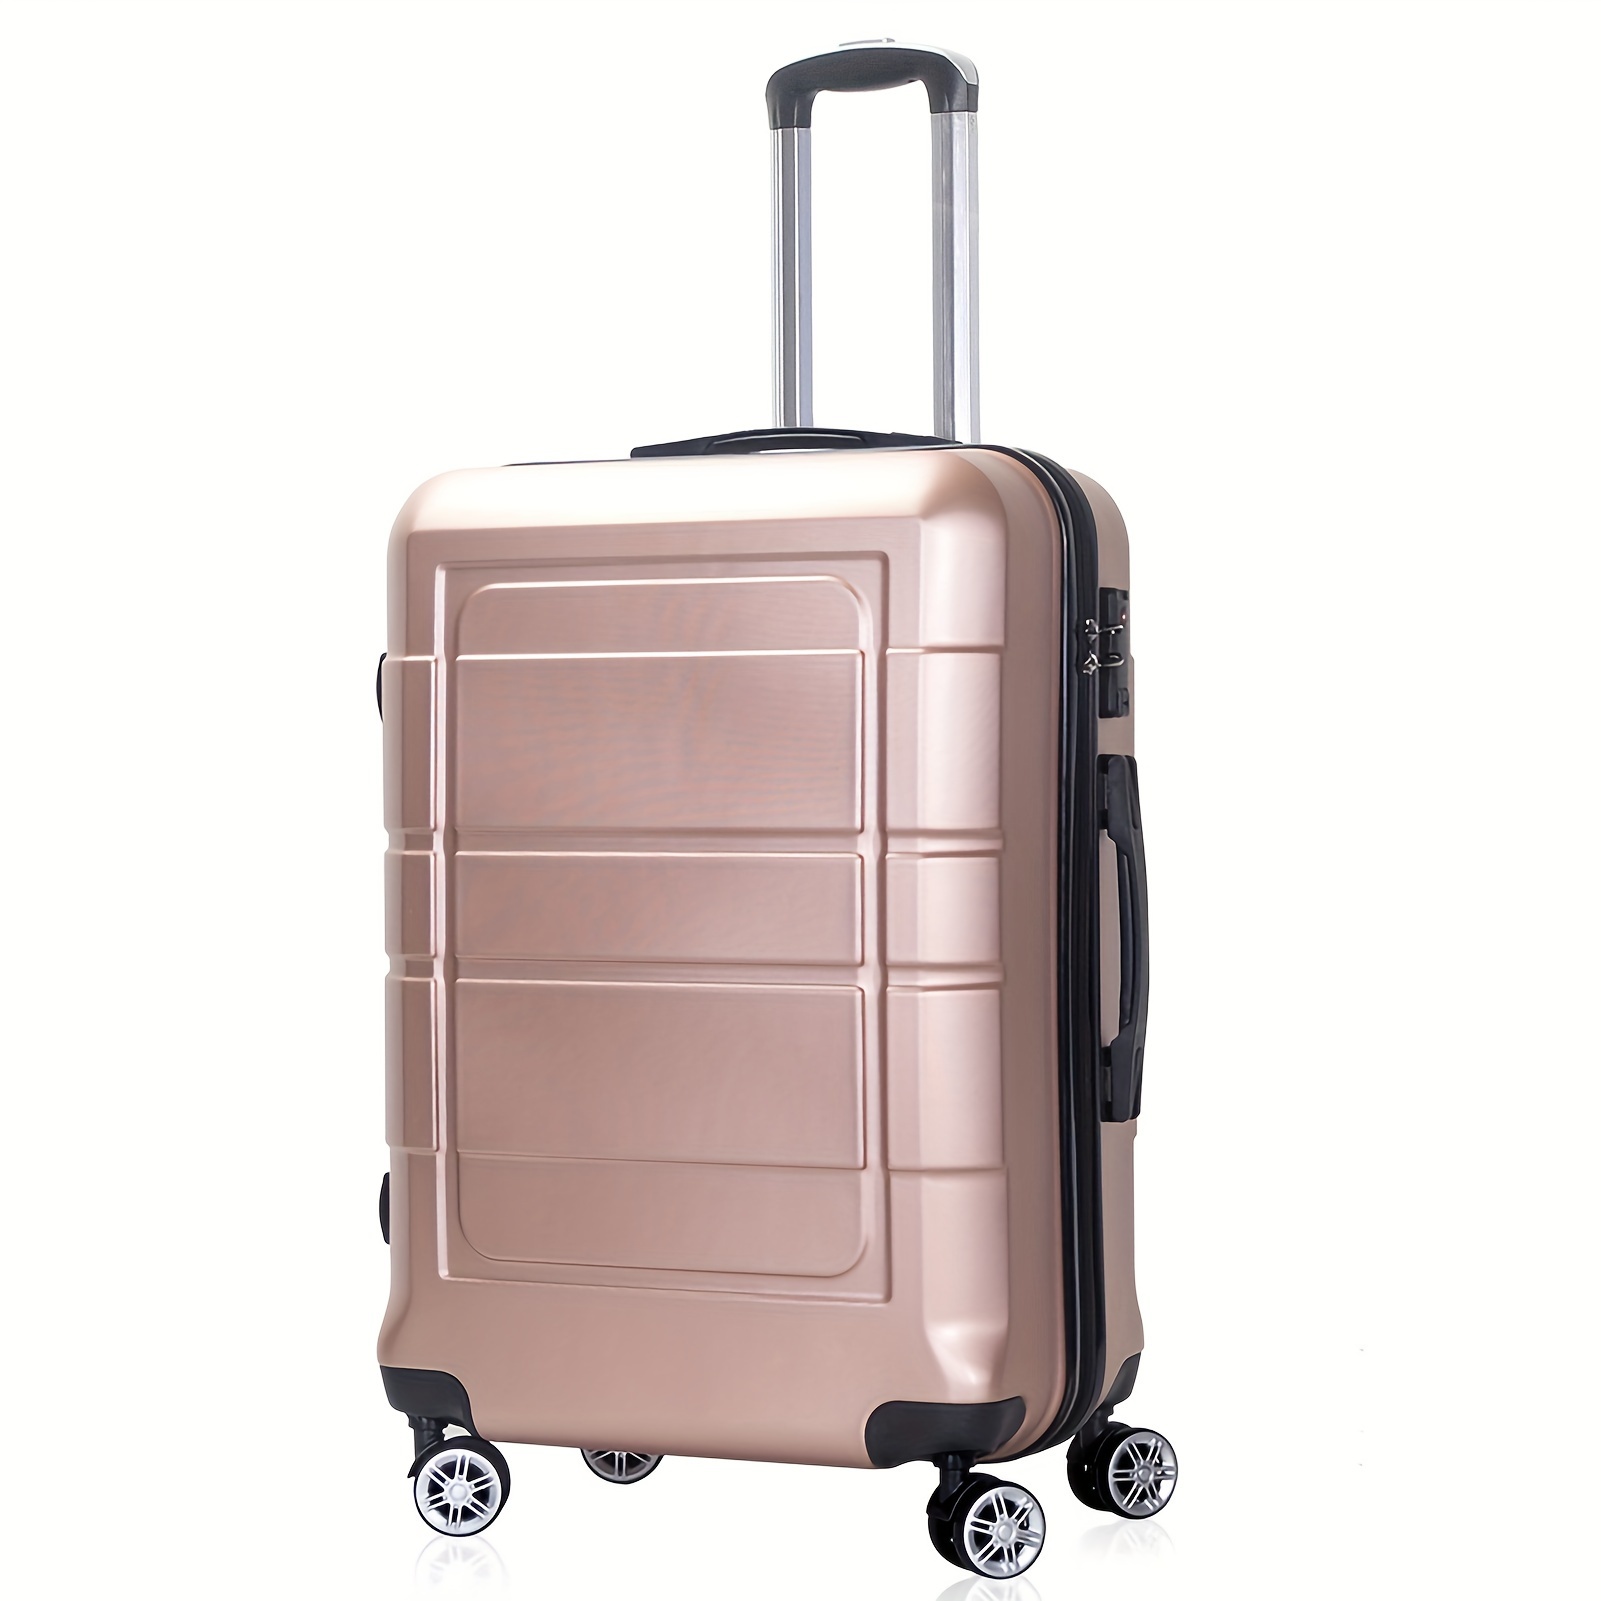 

20 Inch Hardside Carry On Luggage, Spinner Wheels, Tsa Lock, Durable Suitcase